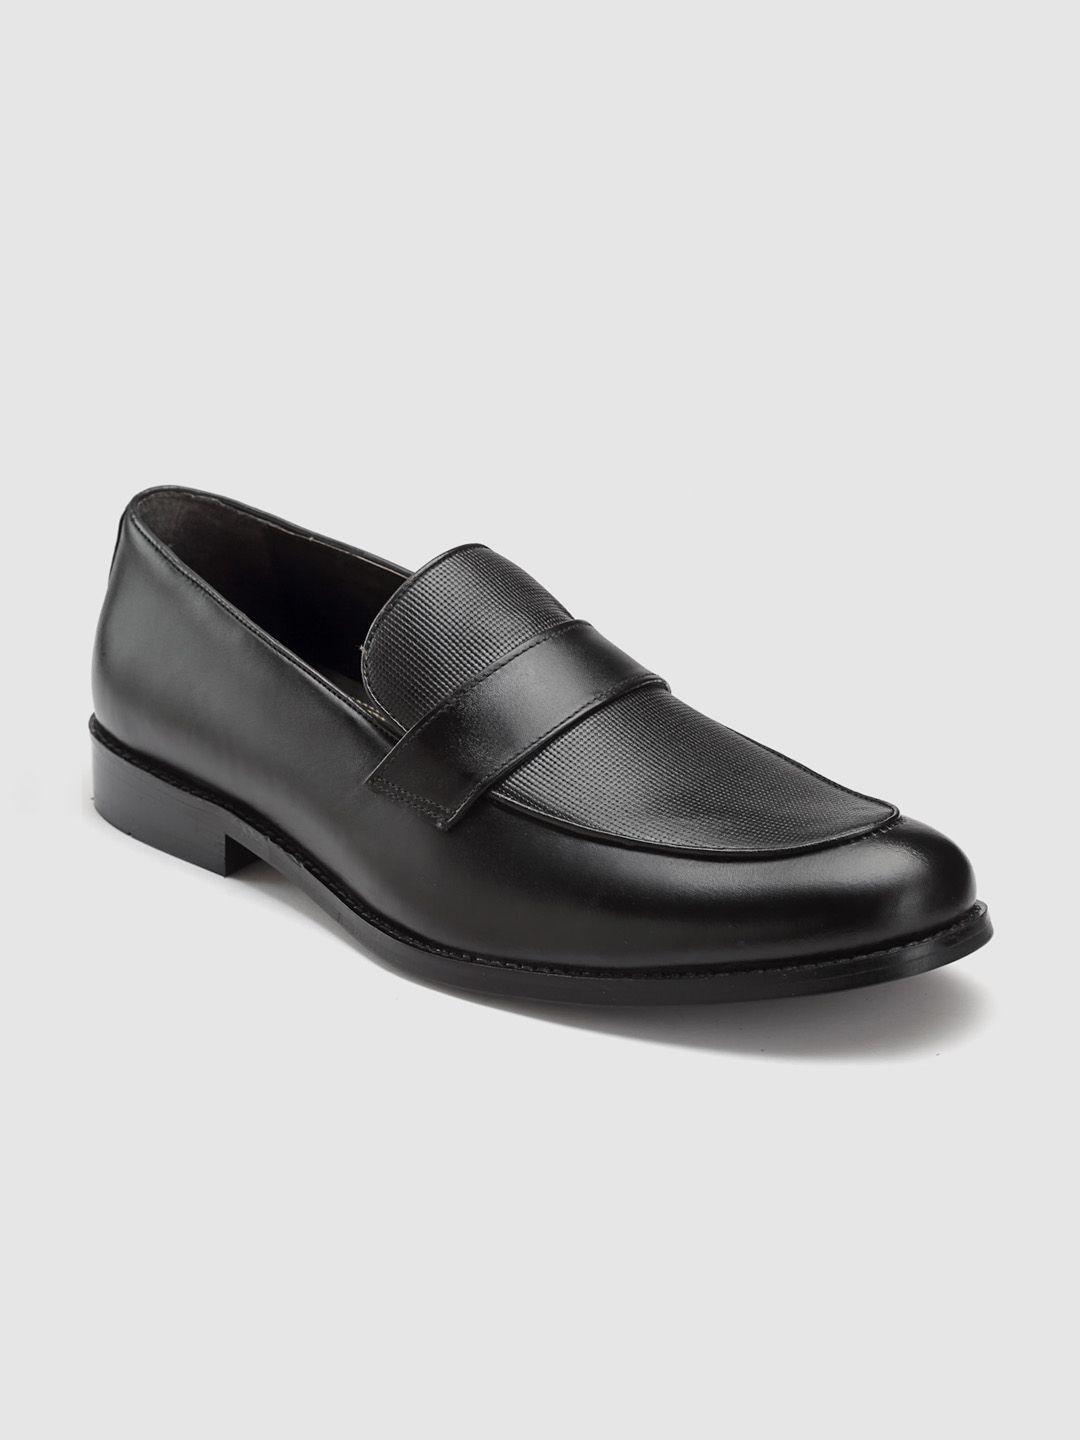 hats off accessories men textured leather formal loafers